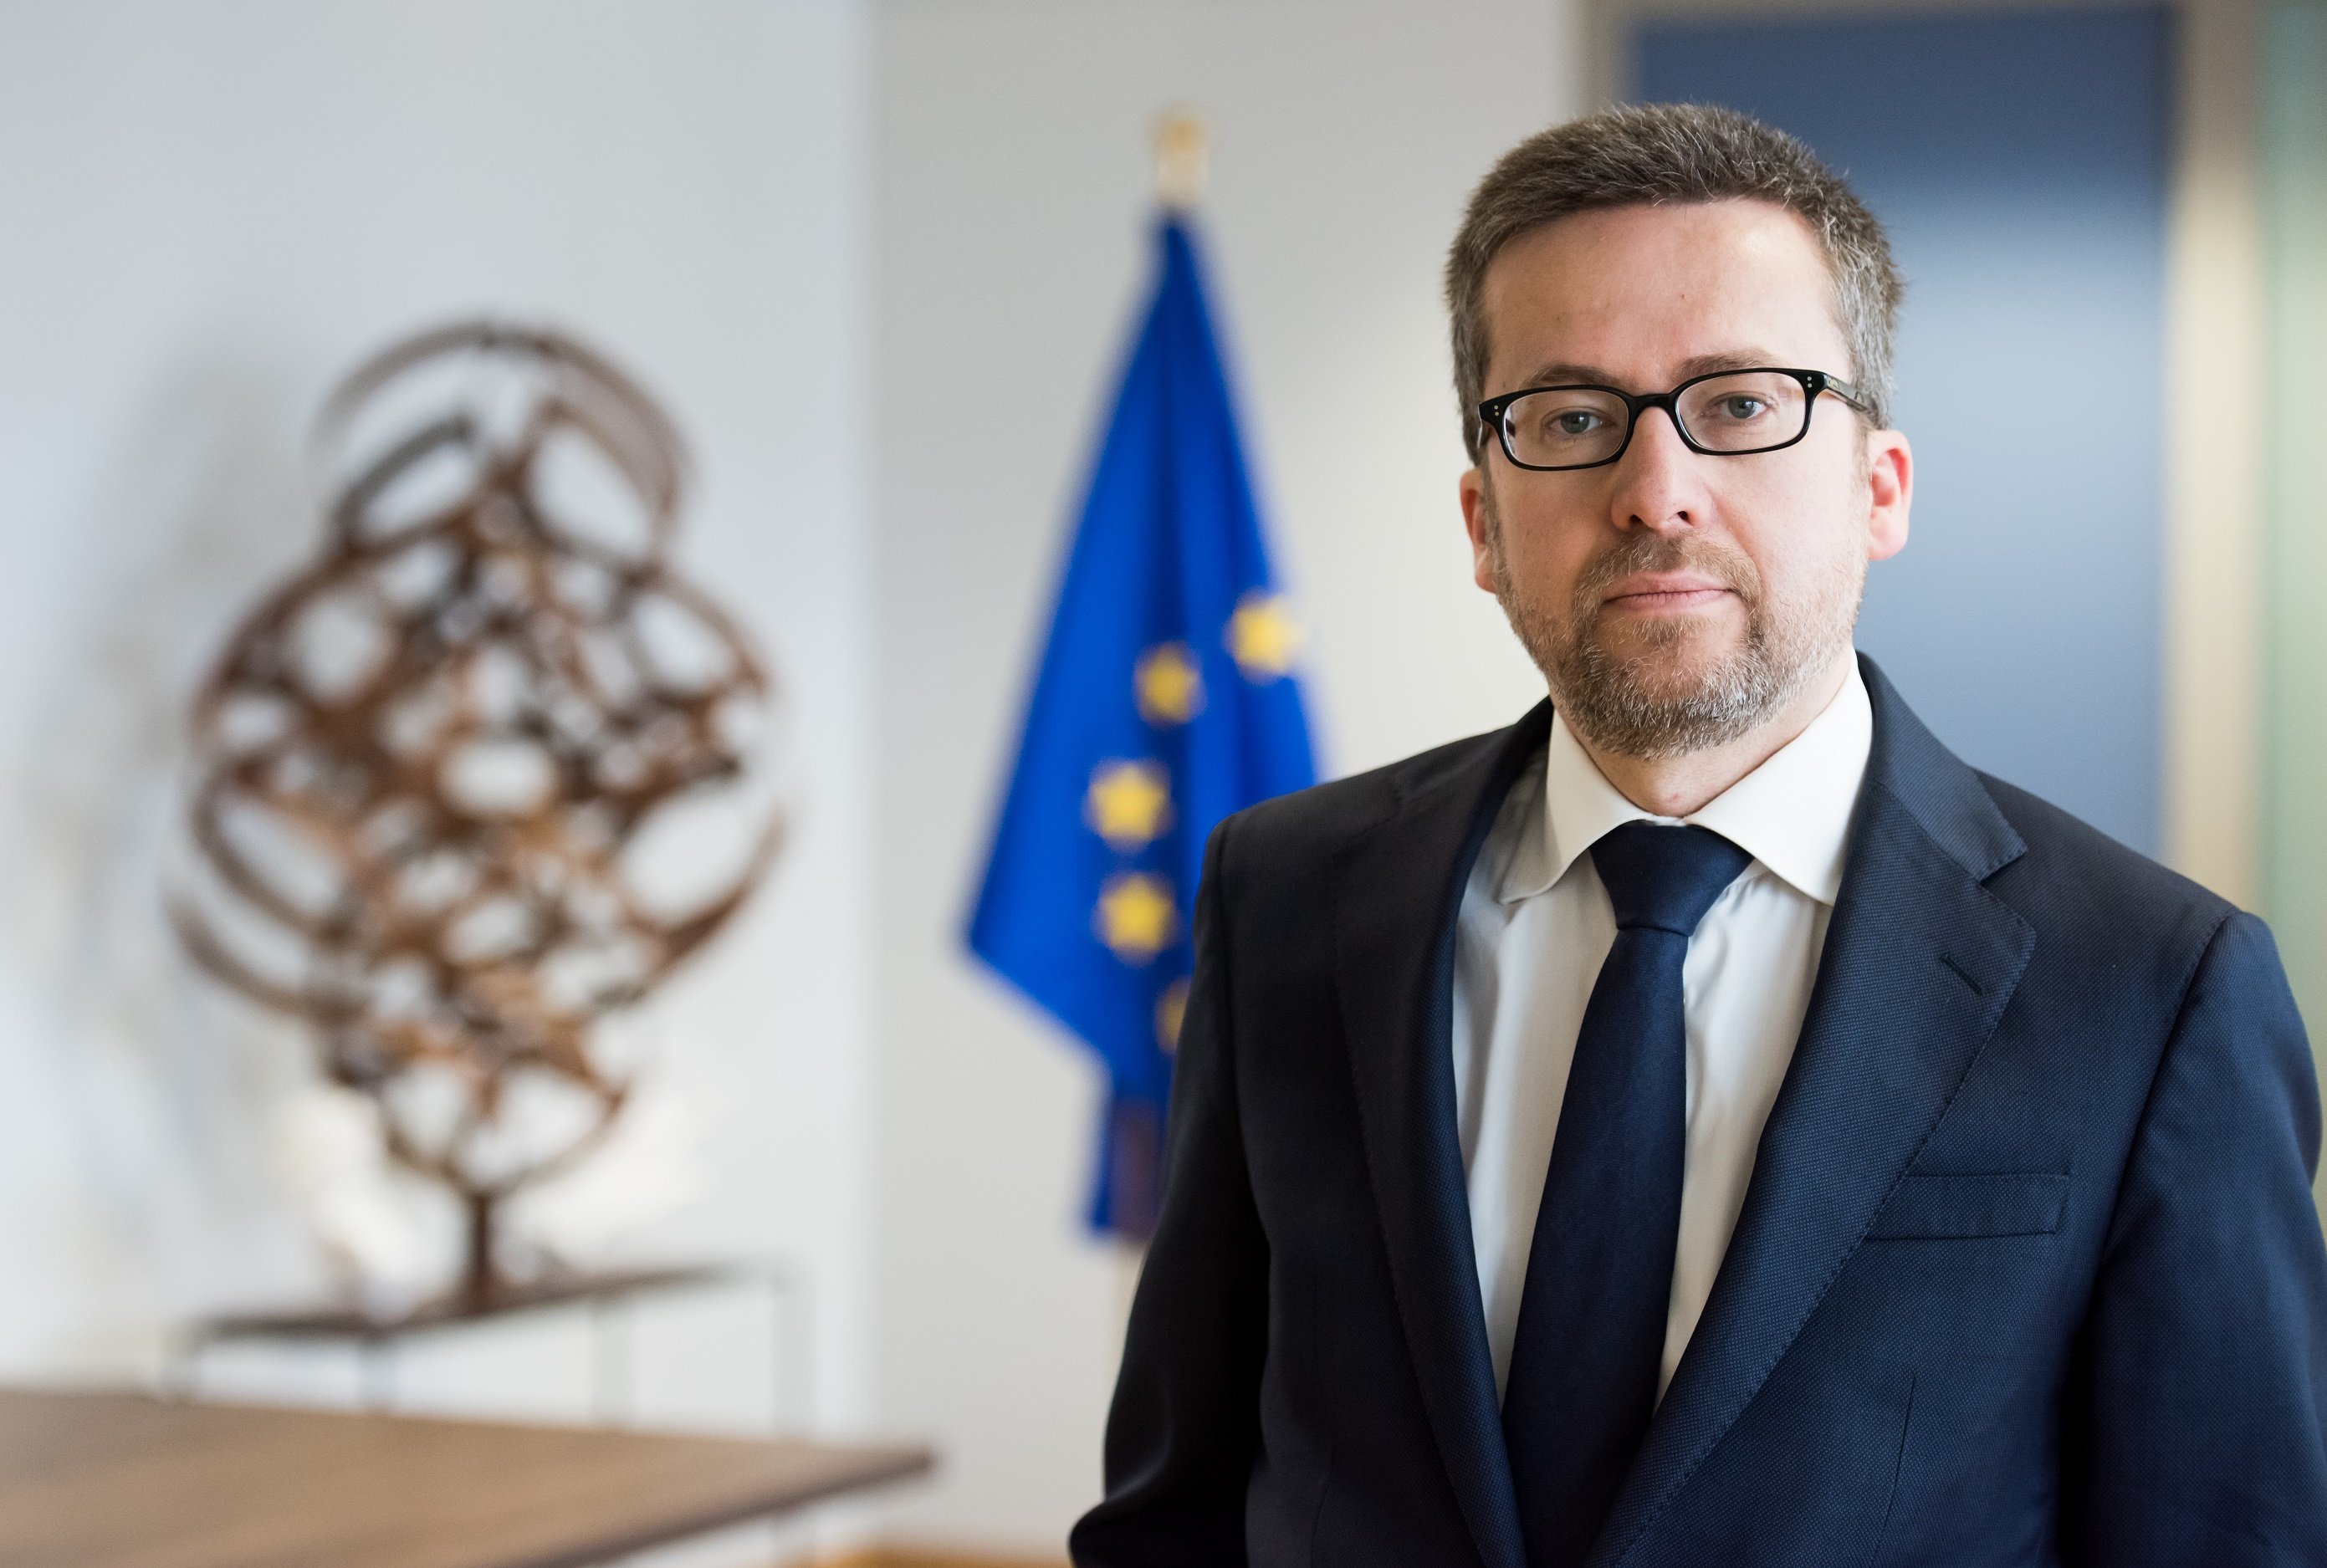 Commissioner Moedas launched proposals for the next European science and research funding programme, Horizon Europe, on 7 June.